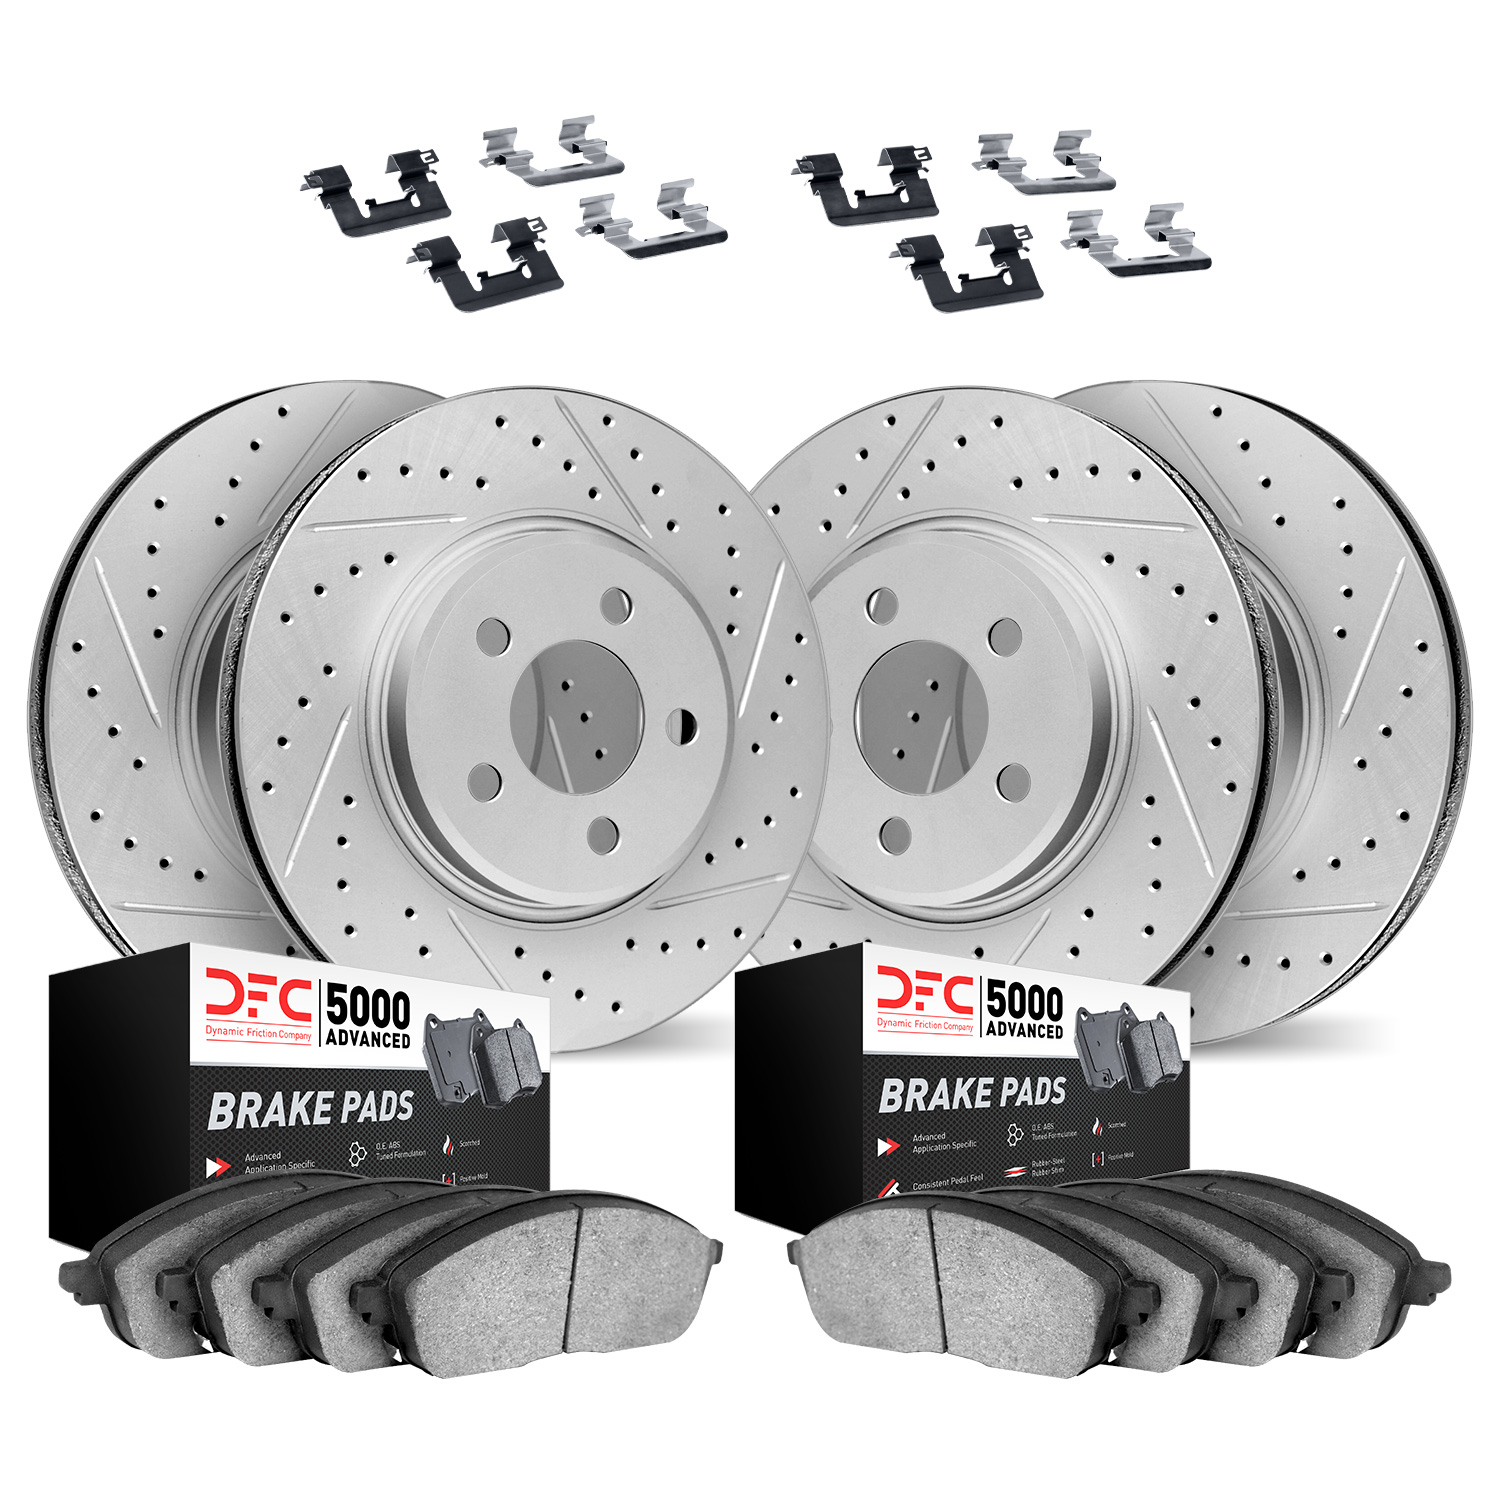 2514-02002 Geoperformance Drilled/Slotted Rotors w/5000 Advanced Brake Pads Kit & Hardware, 1969-1974 Porsche, Position: Front a